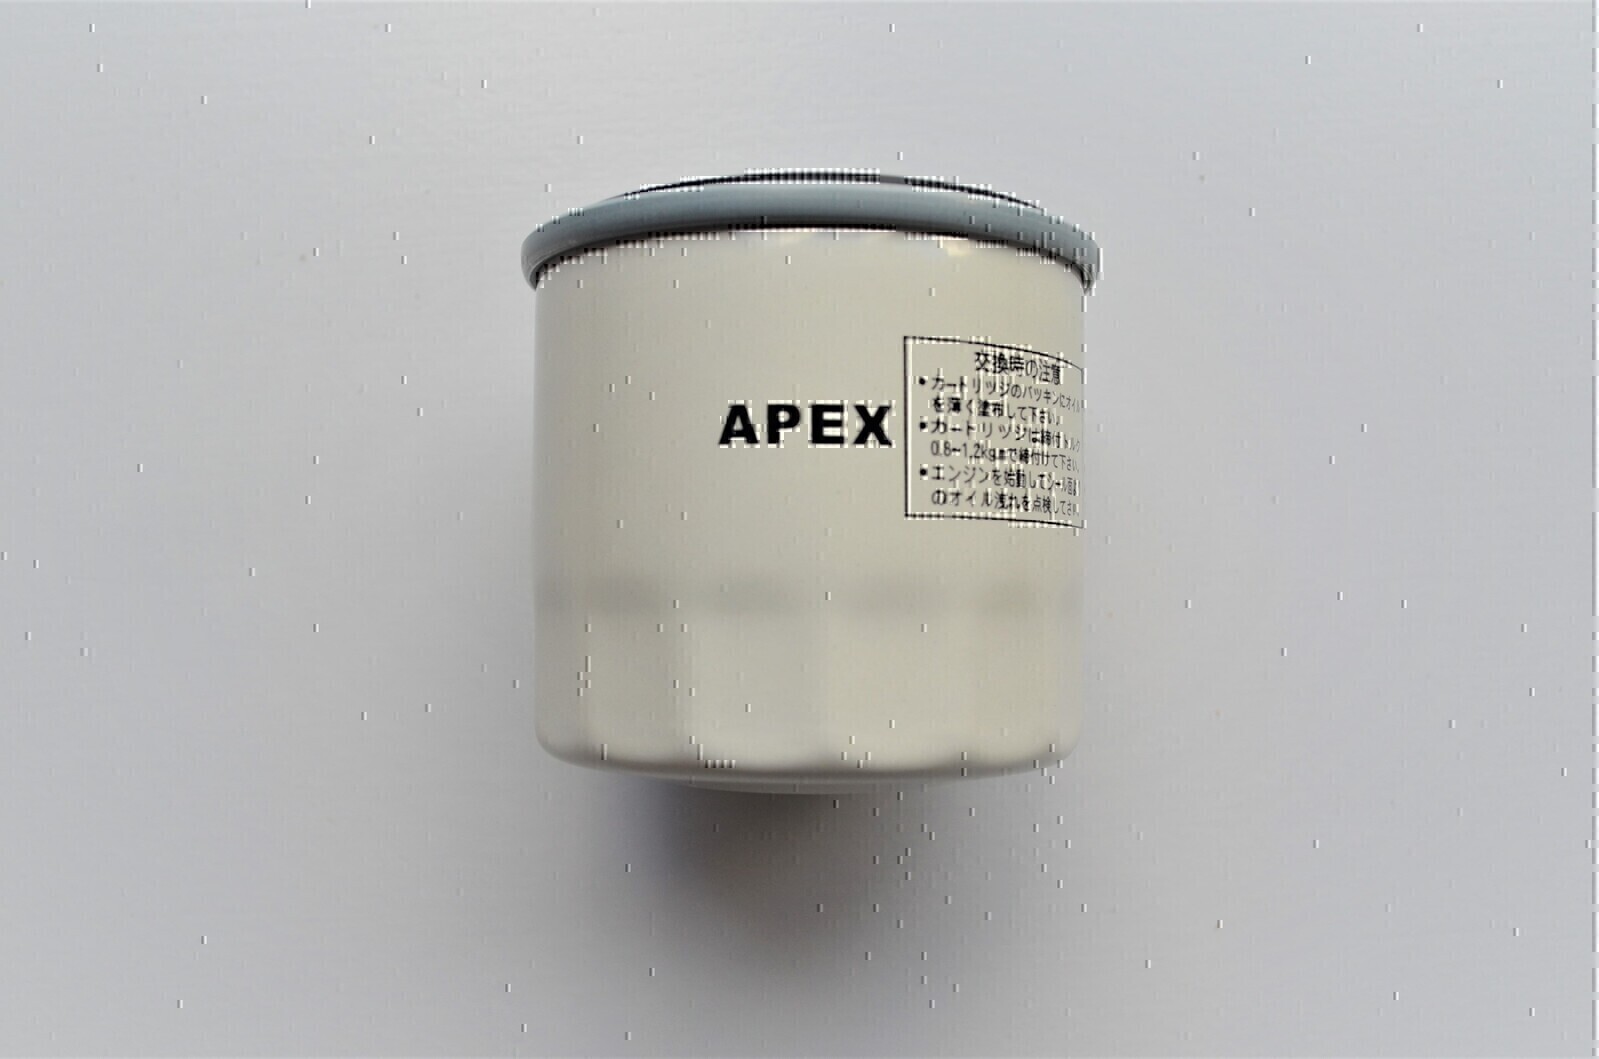 OIL FILTER FOR HONDA 8HP TO 60HP OUTBOARD # 15400-PFB-007